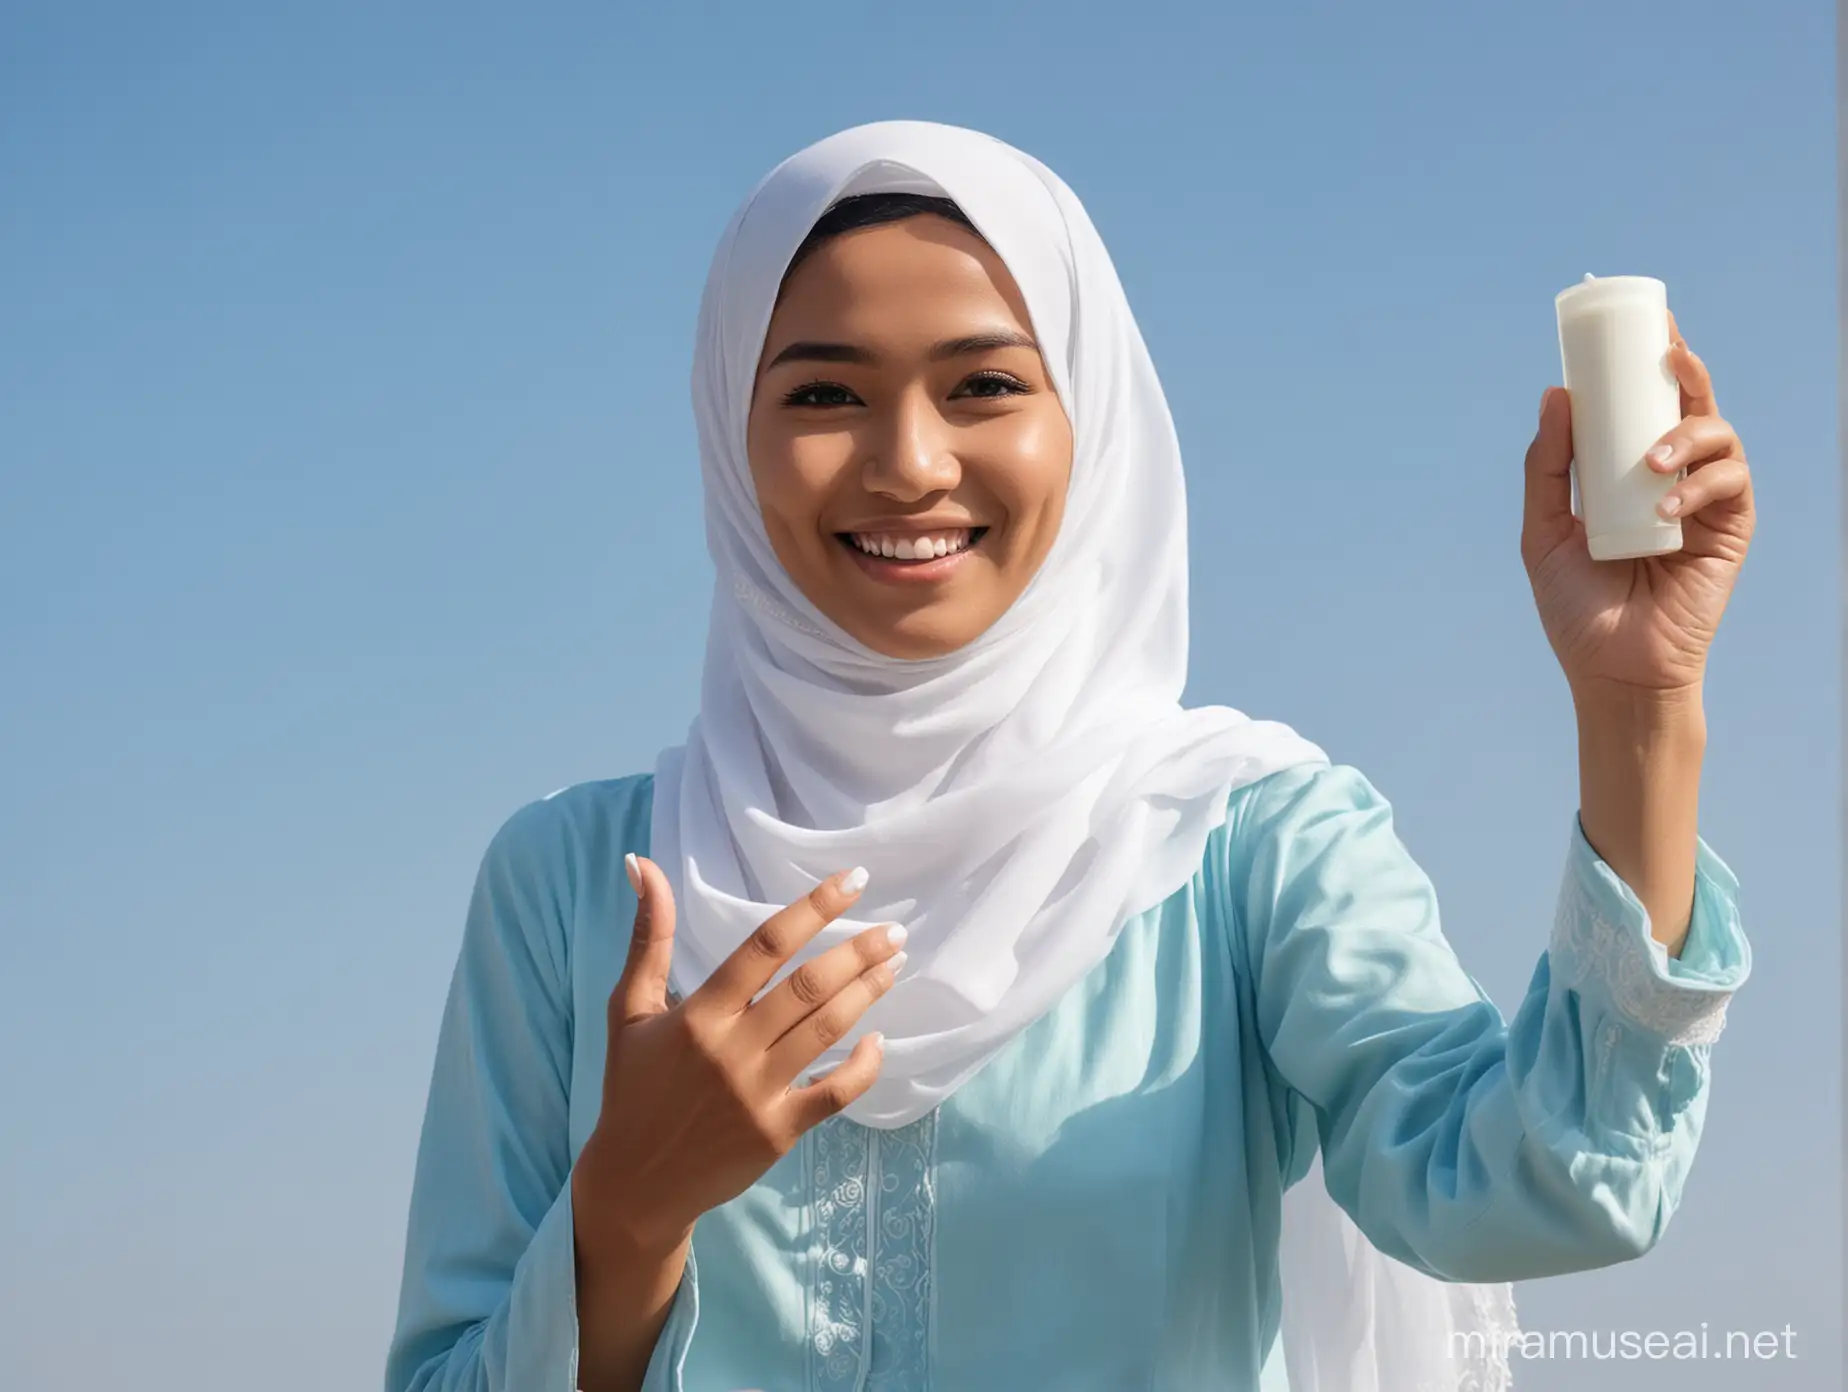 Indonesian Muslim Woman in White Veil and Blue Clothing Applying Lotion